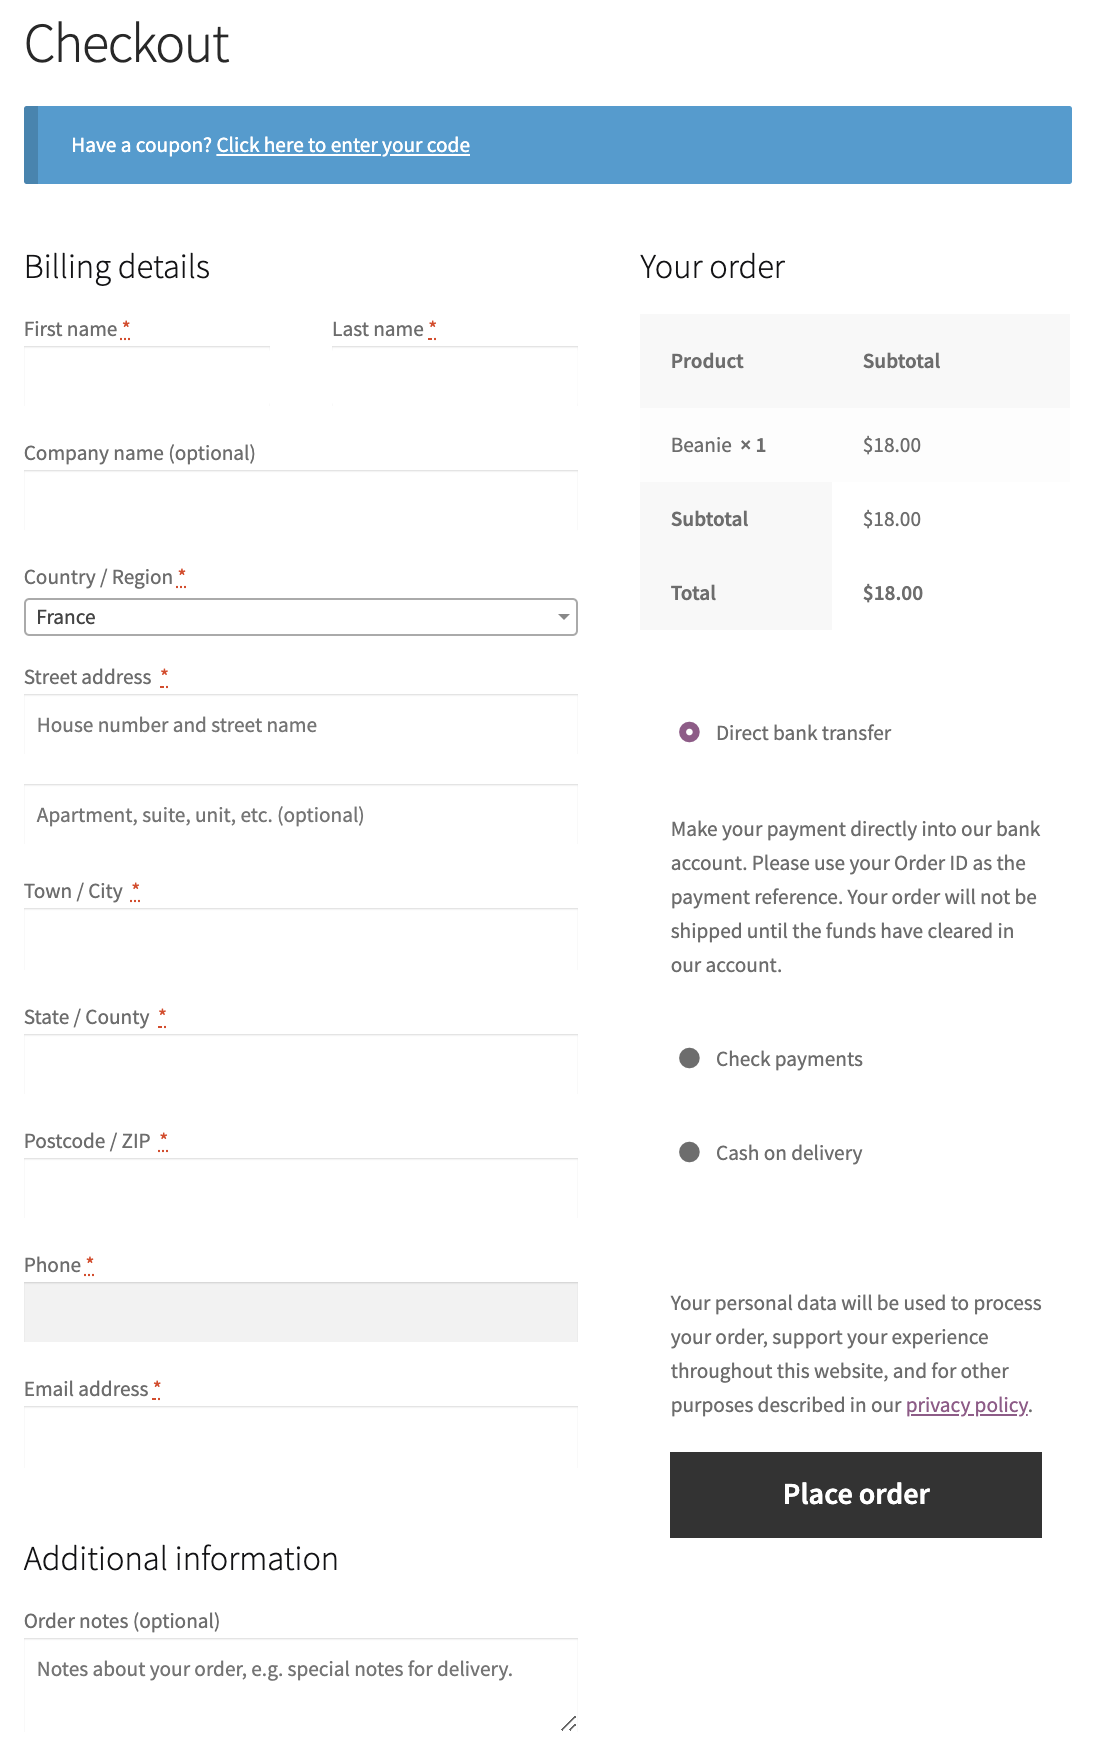 WooCommerce default order page displaying all the fields before placing the order